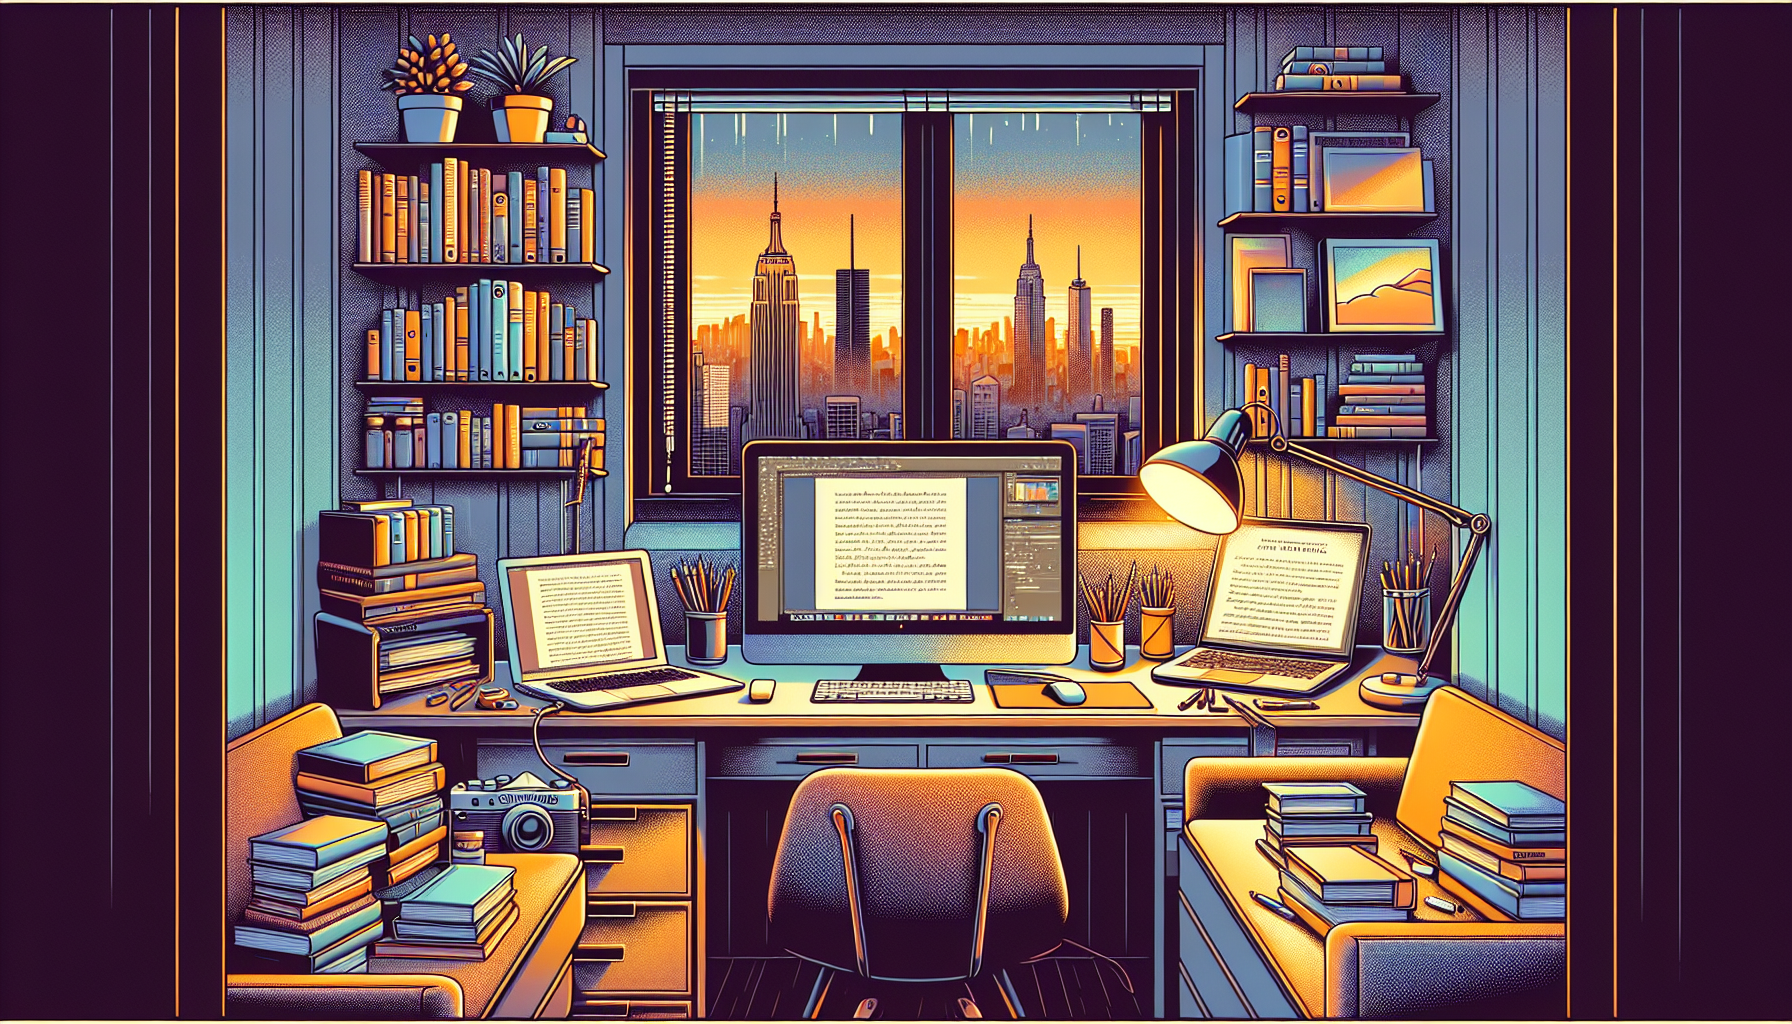 An artistic digital illustration of a cozy writer's nook with various screenwriting software open on multiple vintage and modern devices, surrounded by books on film writing and dimly lit by a classic